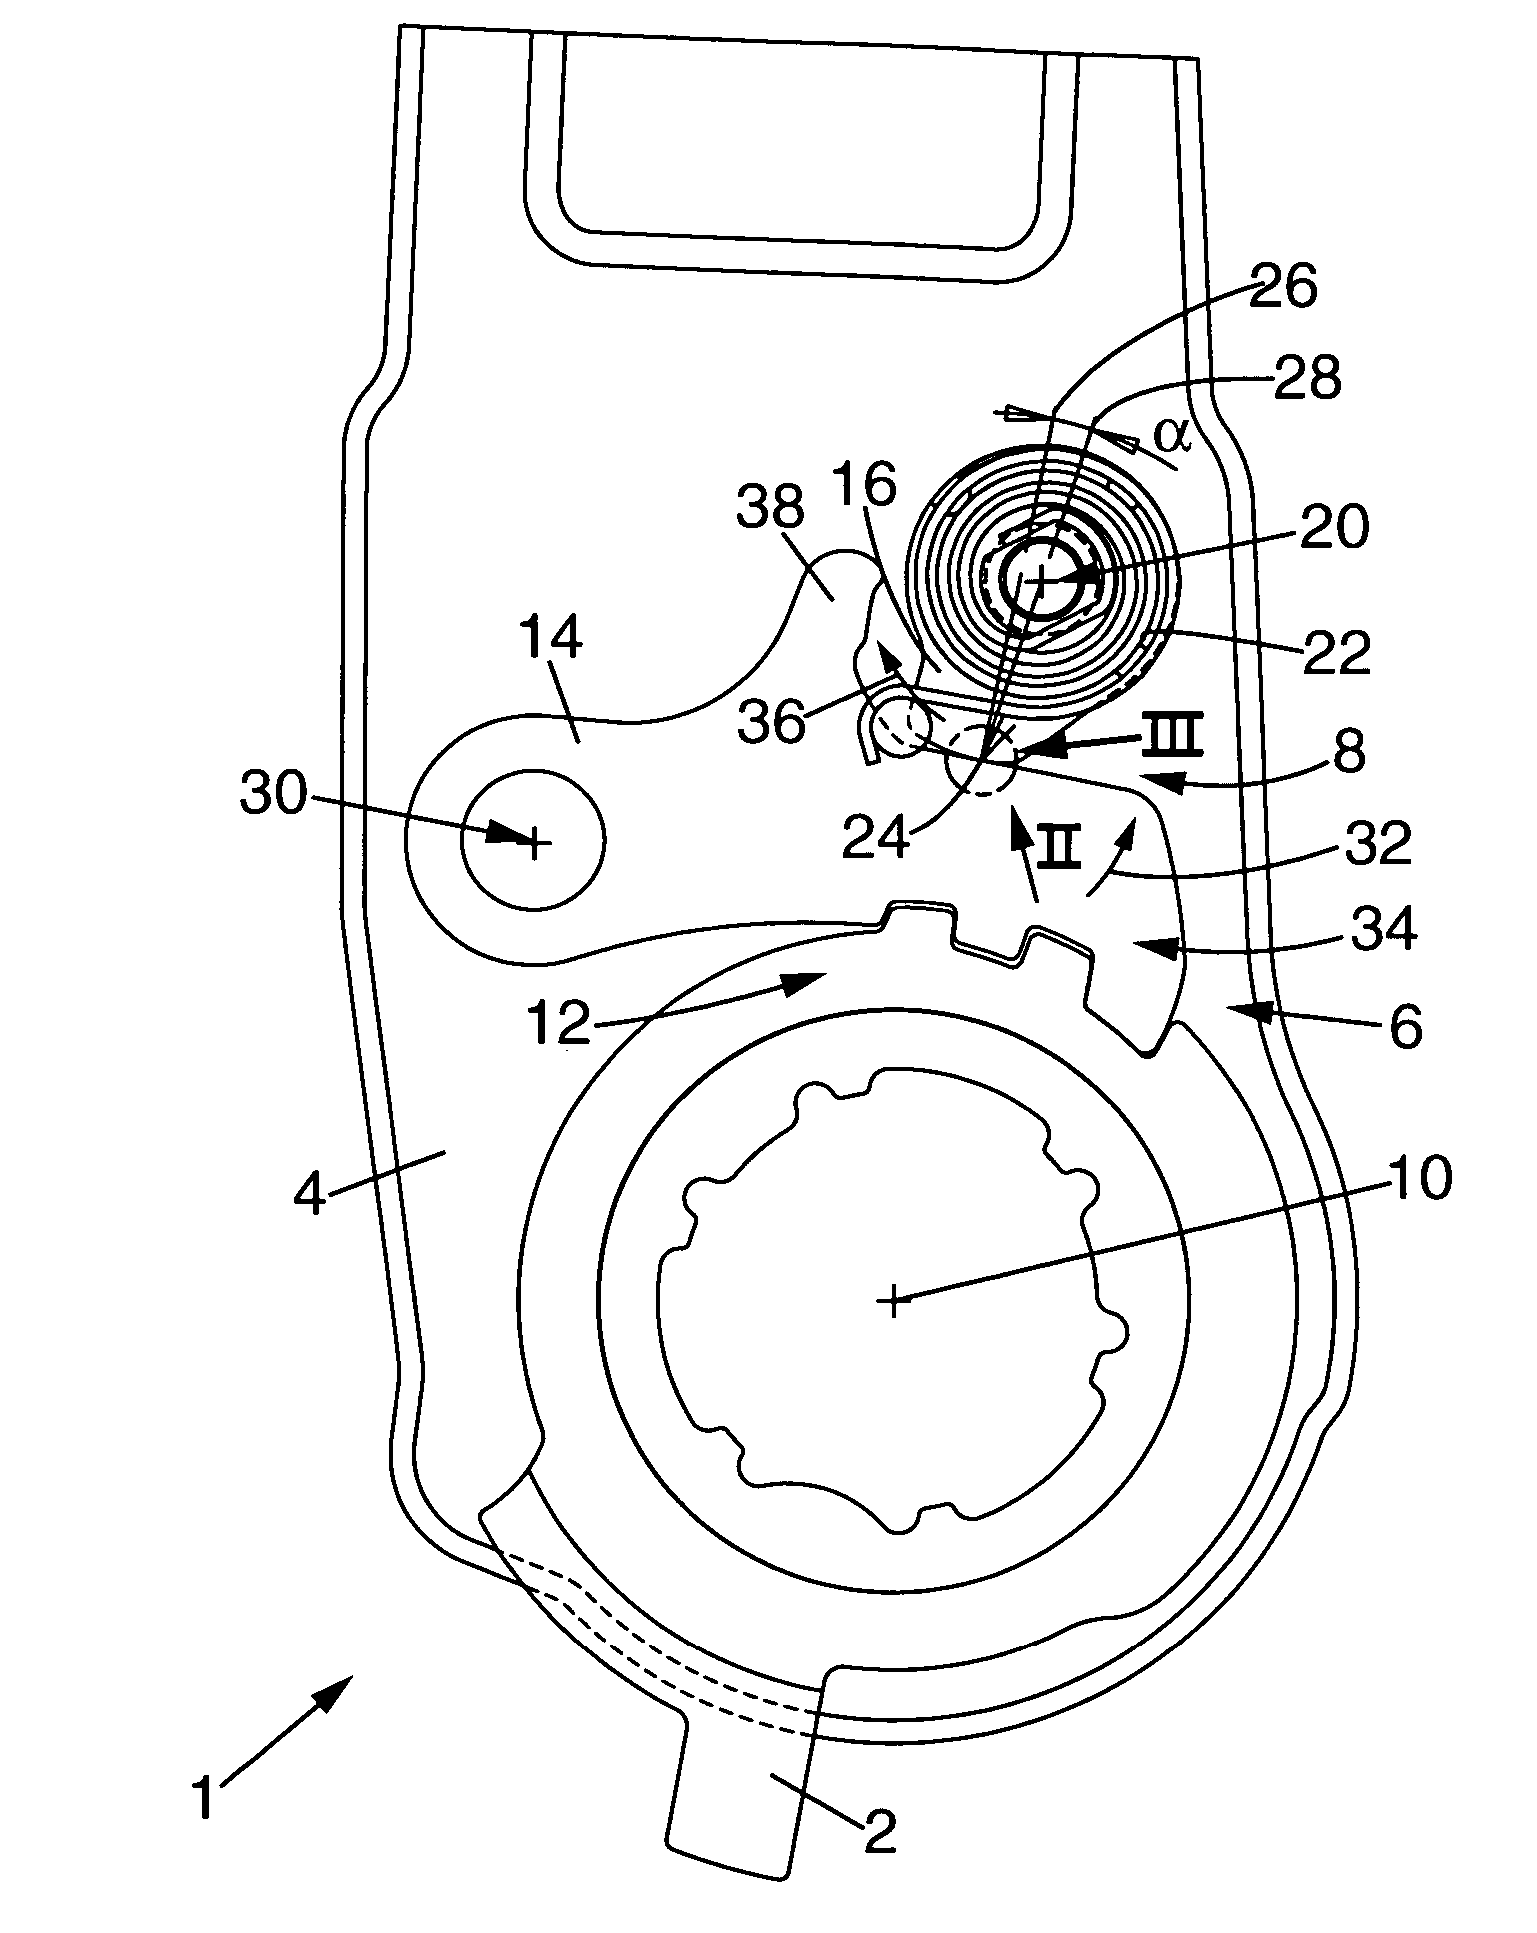 Mechanism for adjusting the inclination of a motor vehicle seat